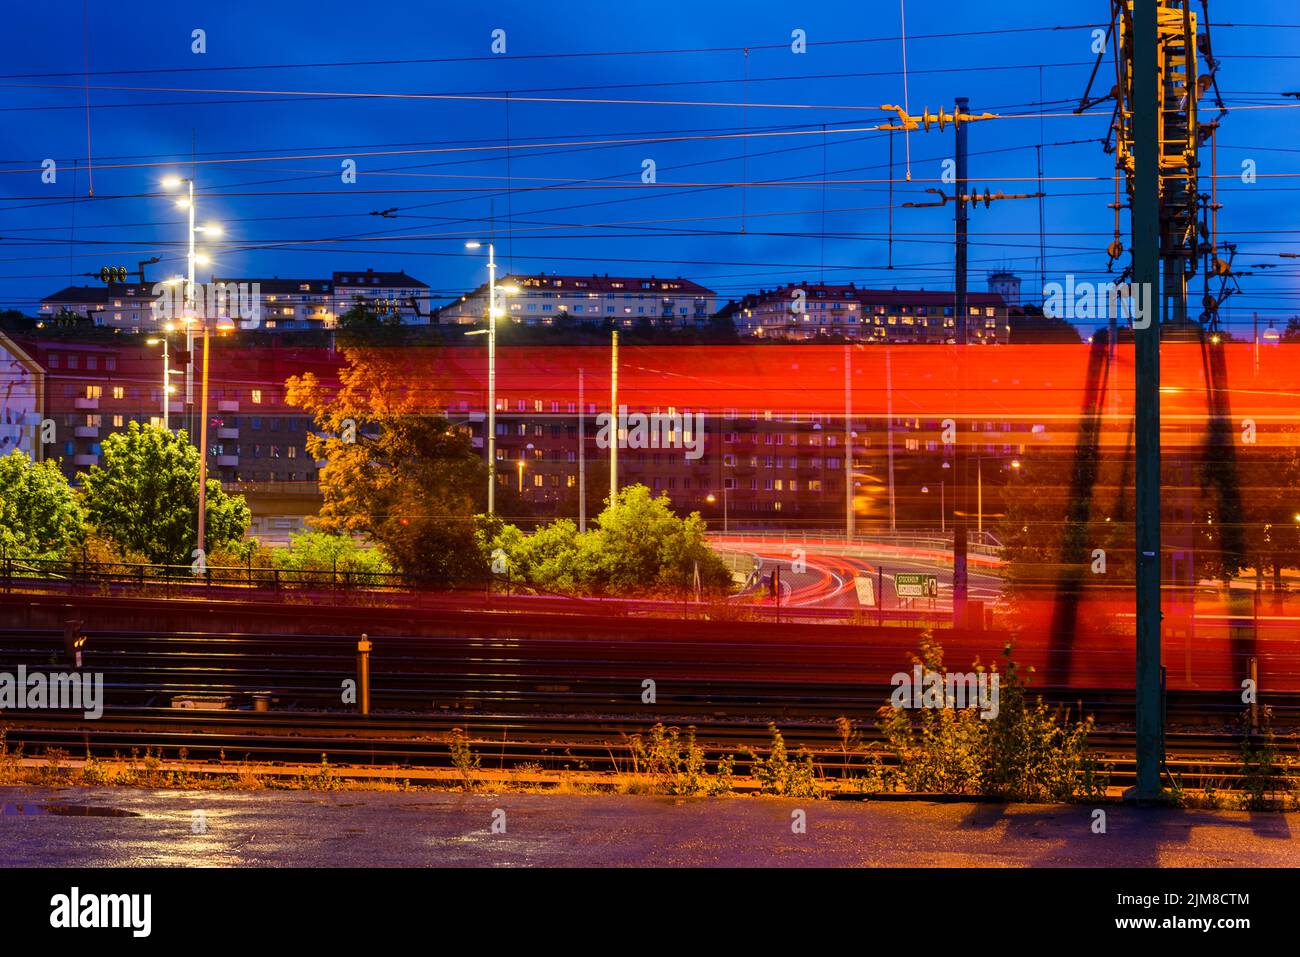 Train passing by at city in evening Stock Photo